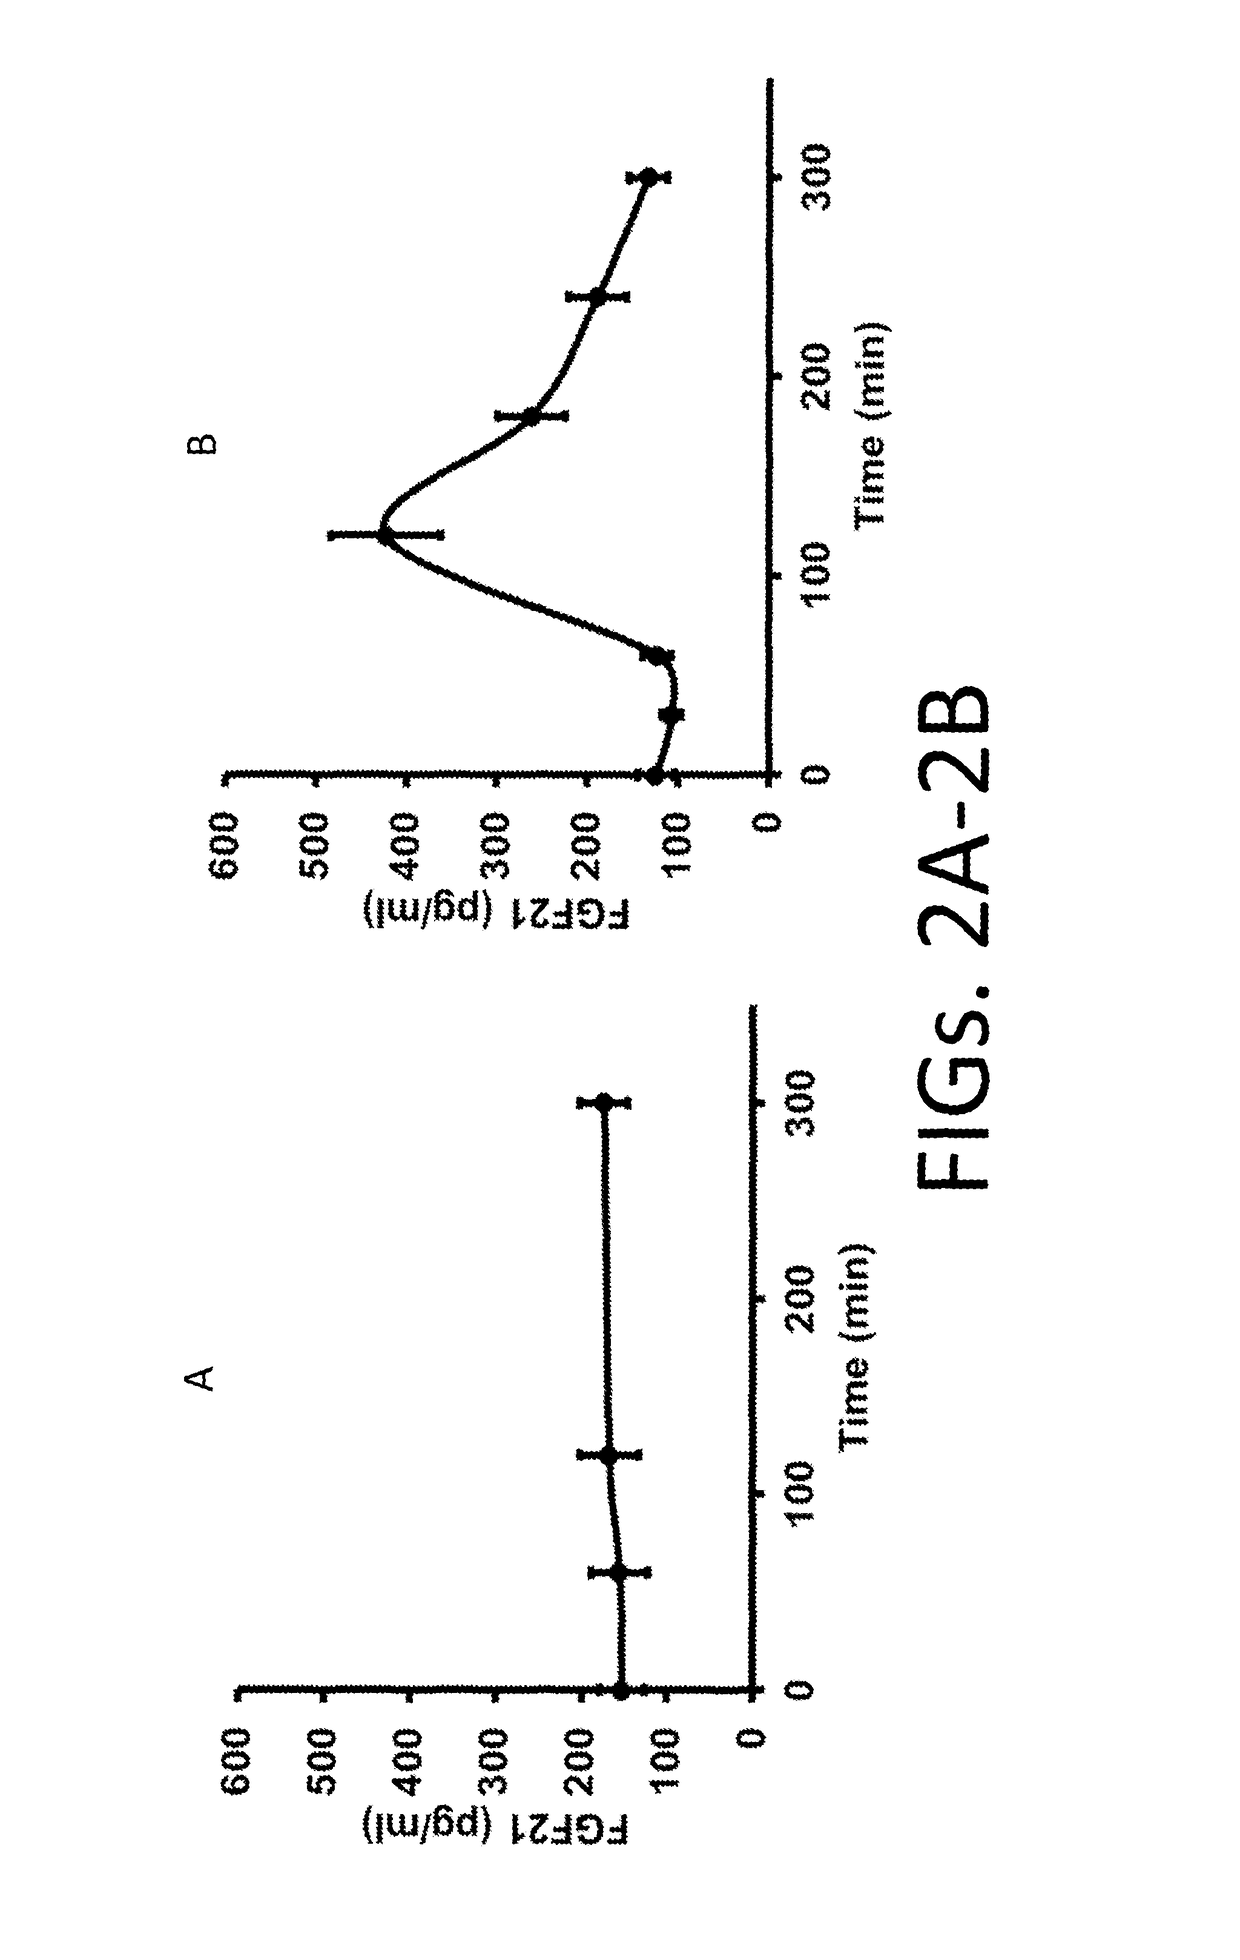 Measurement of FGF21 as a biomarker of fructose metabolism